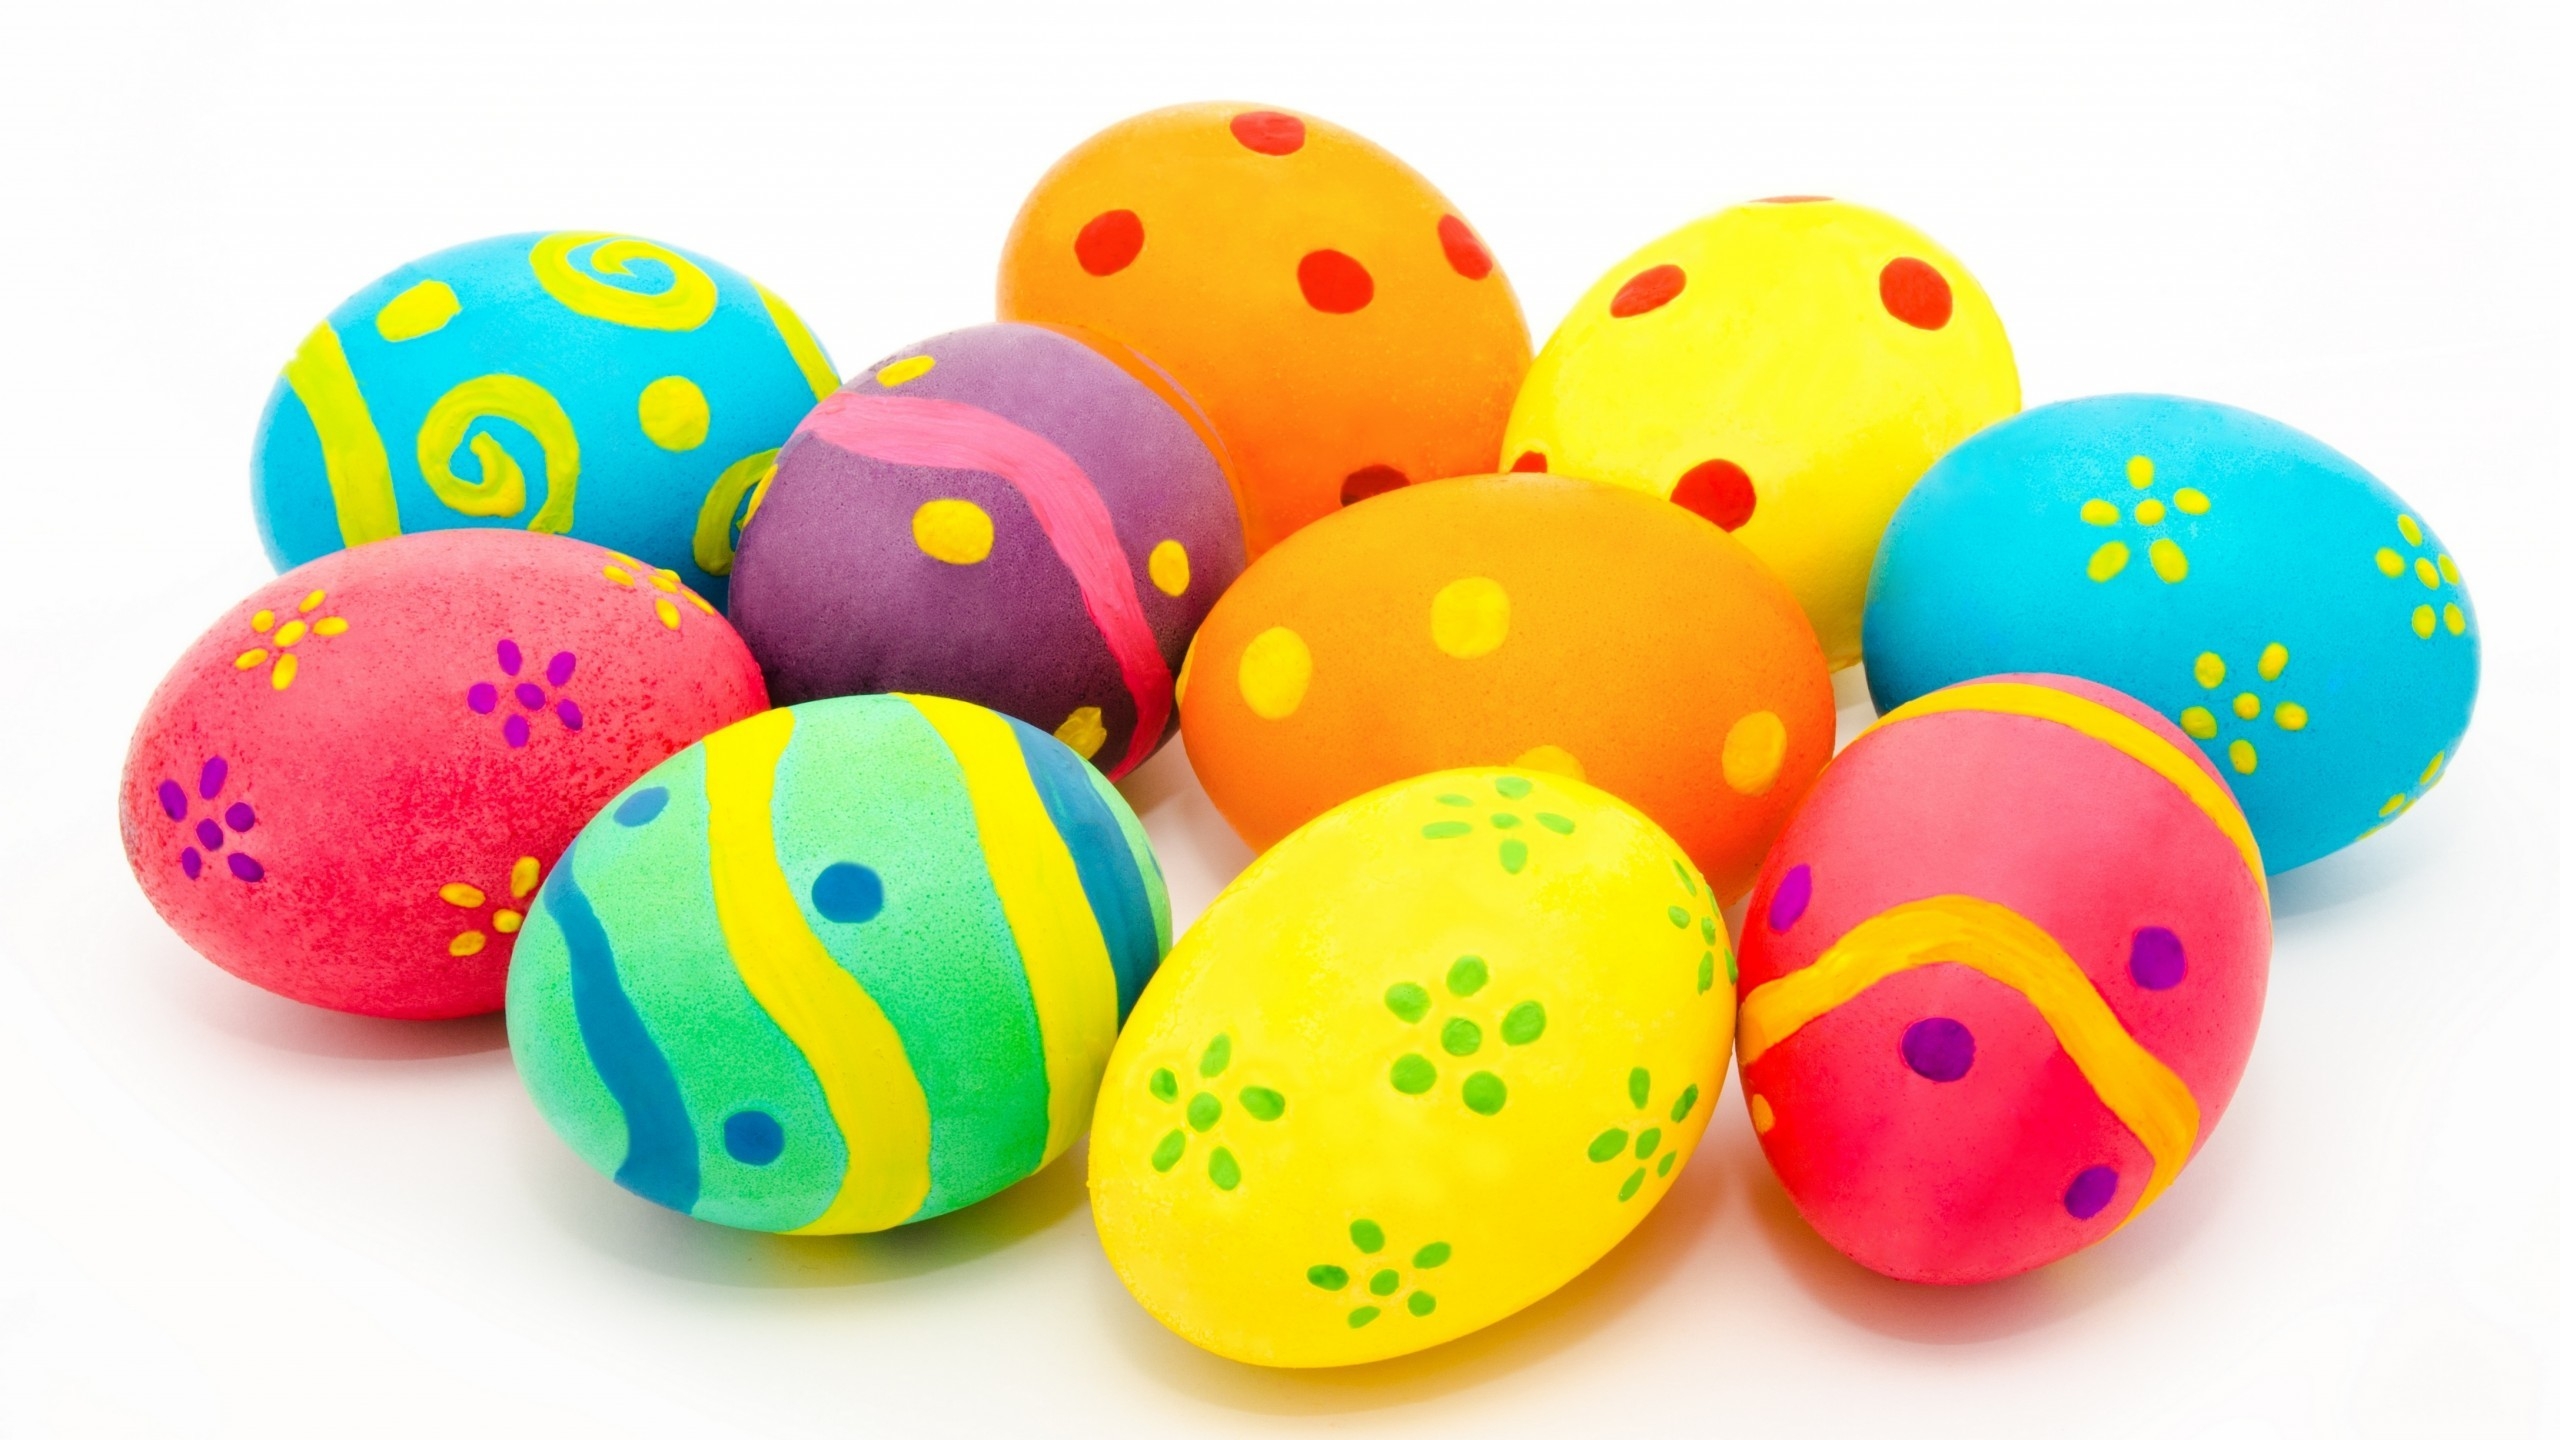 Many Colorful Easter Eggs for 2560x1440 HDTV resolution